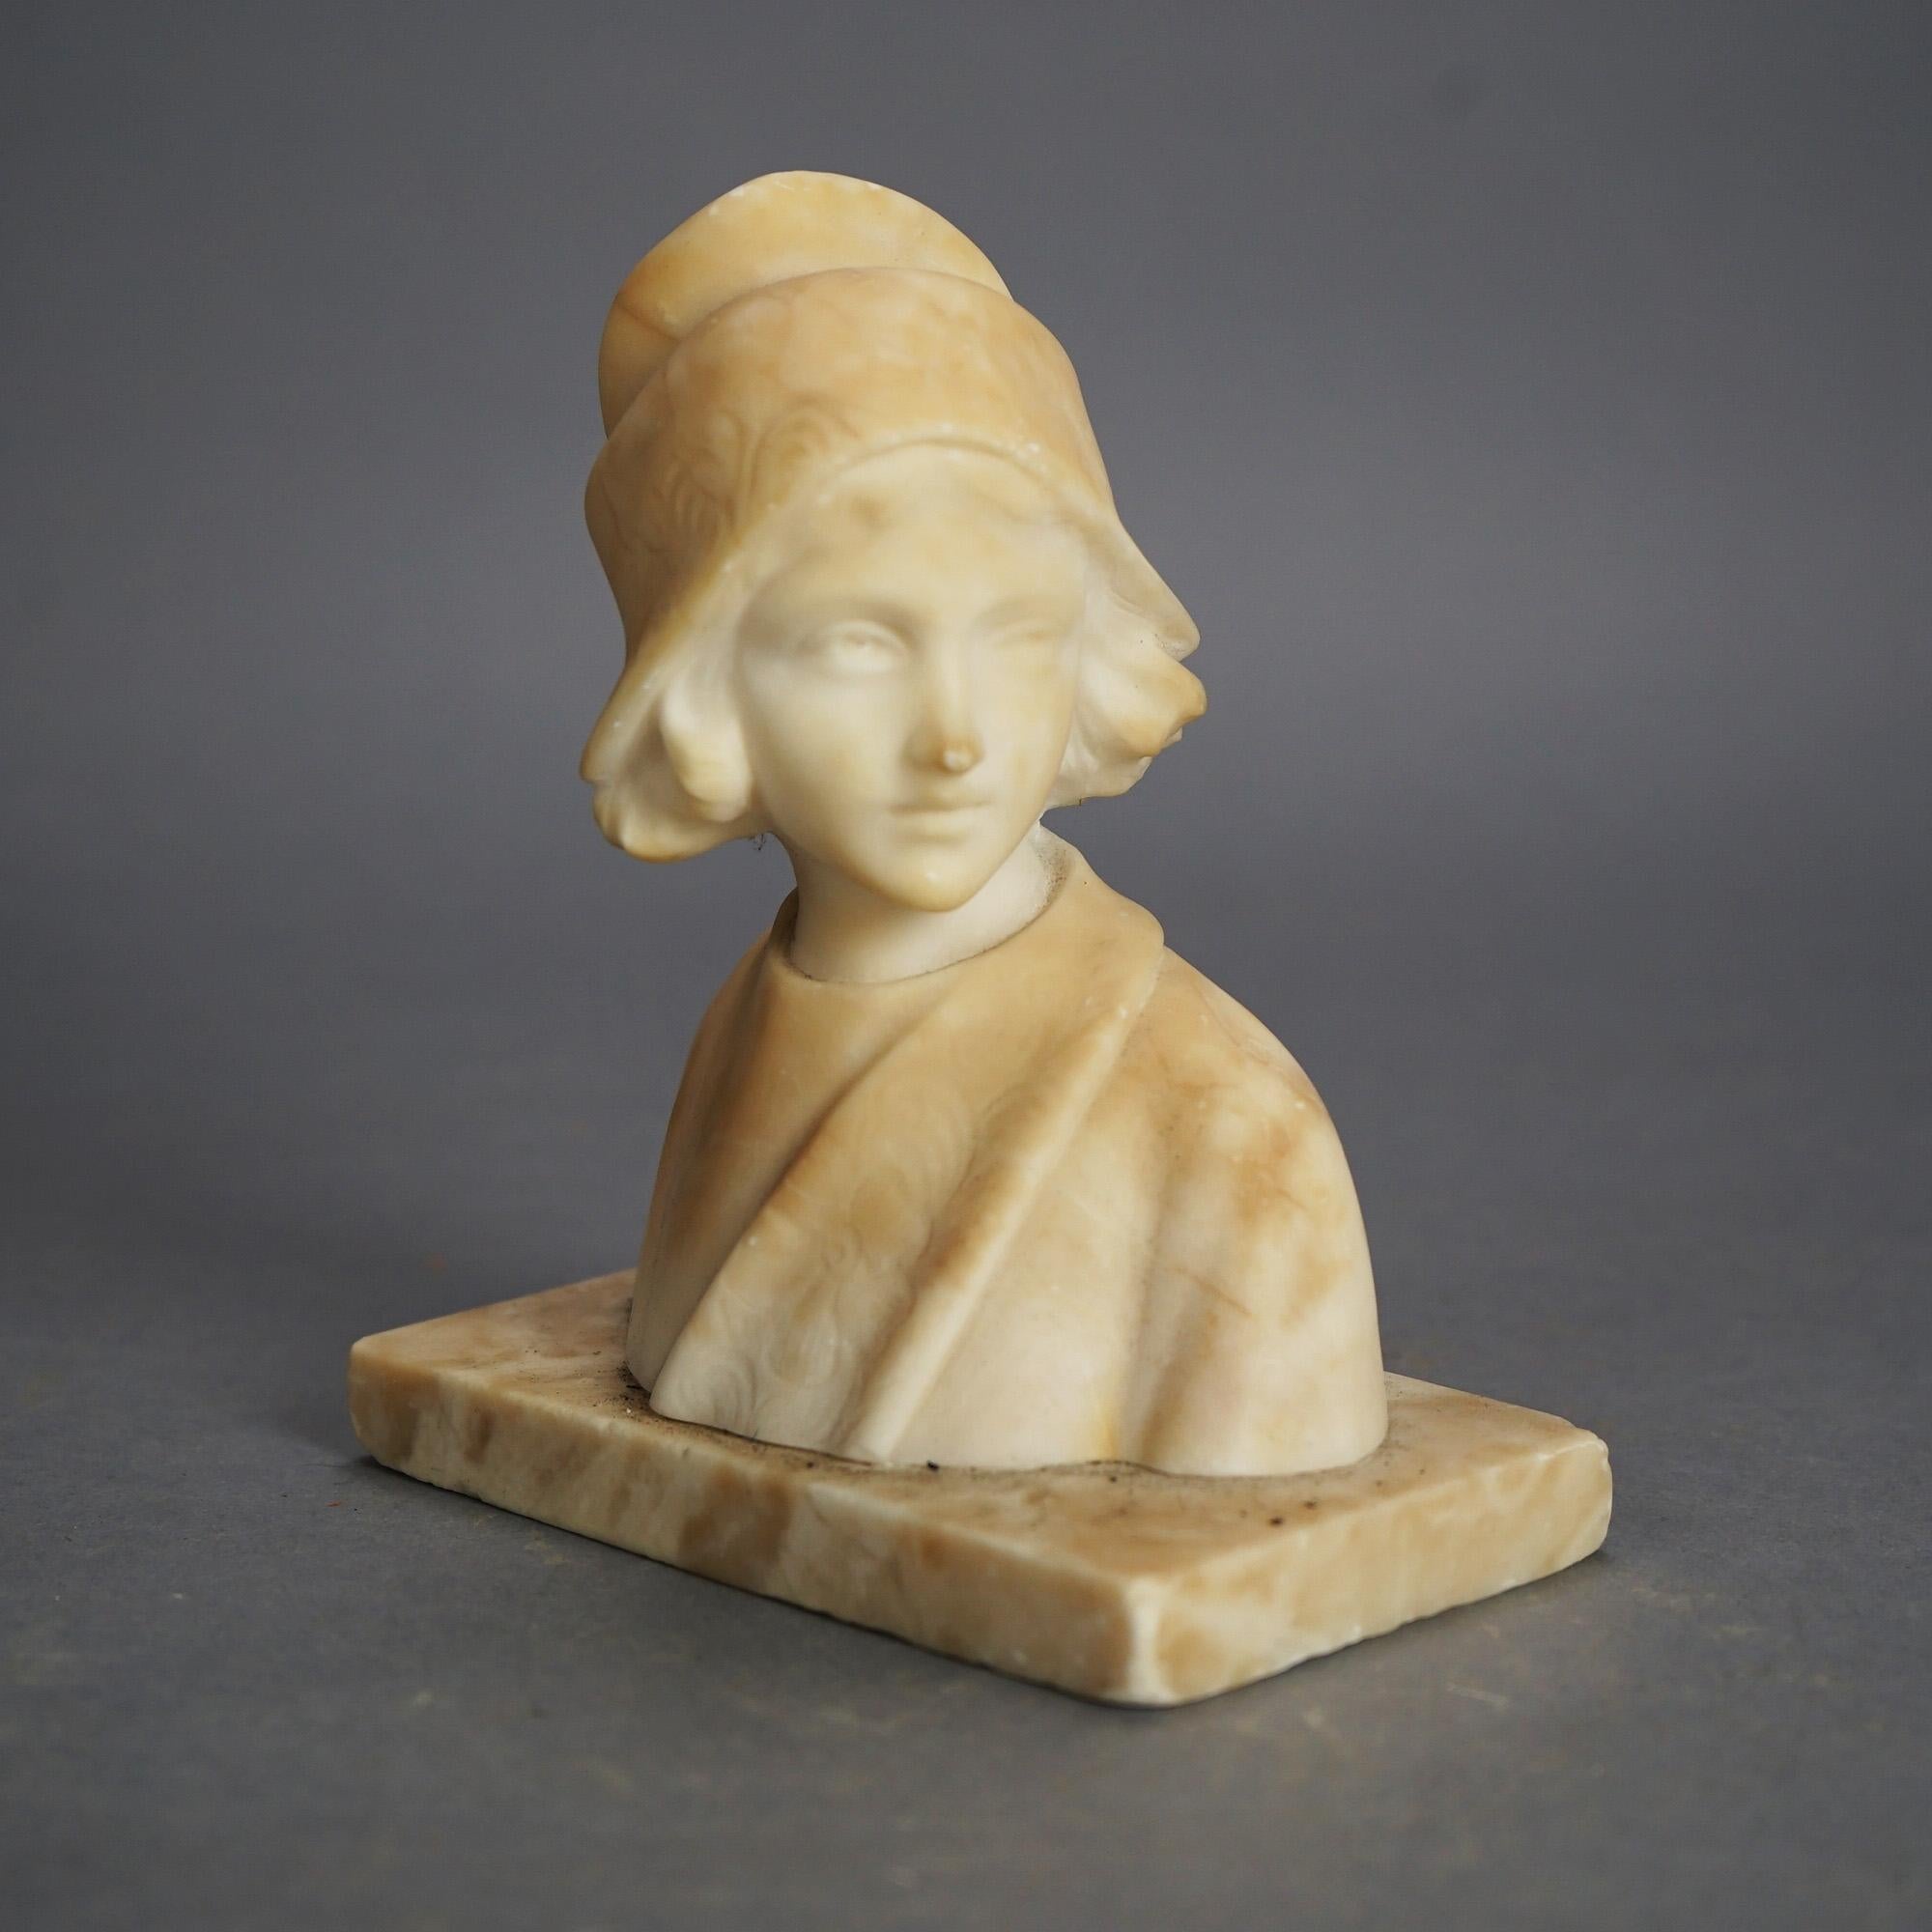 Antique Italian Neoclassical Italian Carved Alabaster Bust, Joan of Arc, C1900

Measures - 6.5